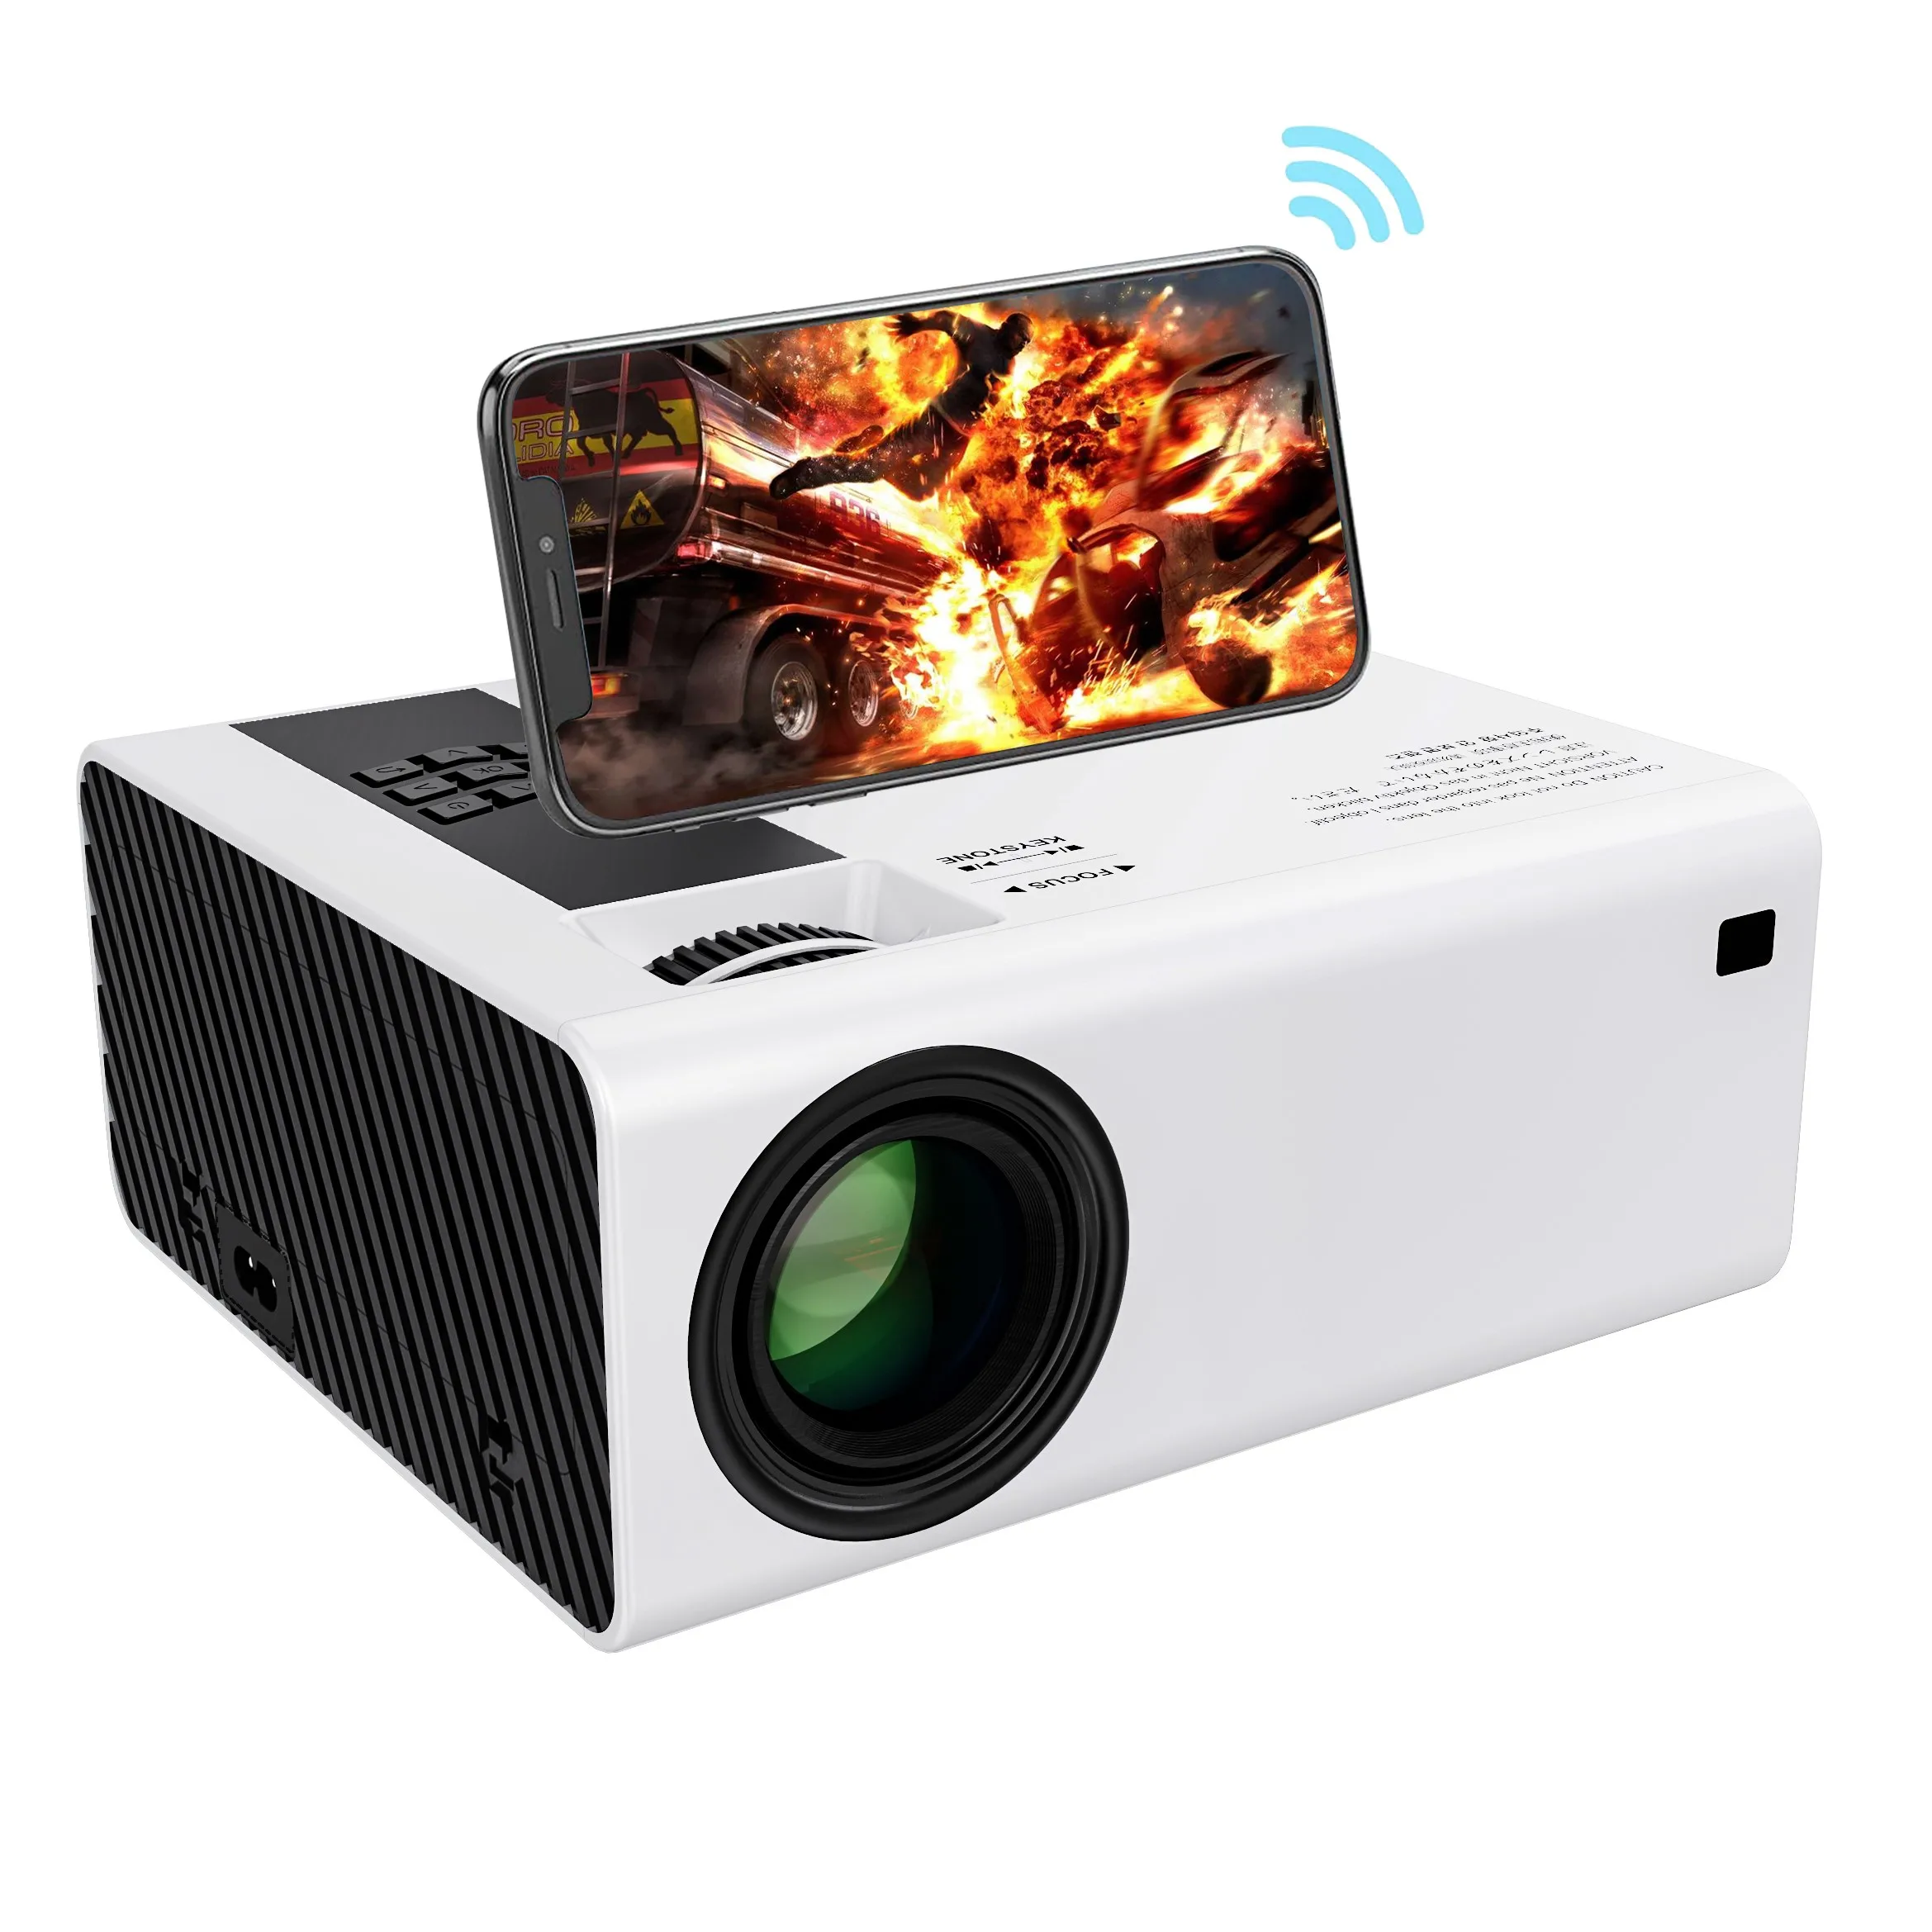 

Factory New Portable Mini Led Projector LCD Y6 200" Native 600P 190 Ansi Lumens Smart IOS/Android Phone WIFI Pocket Projector, White